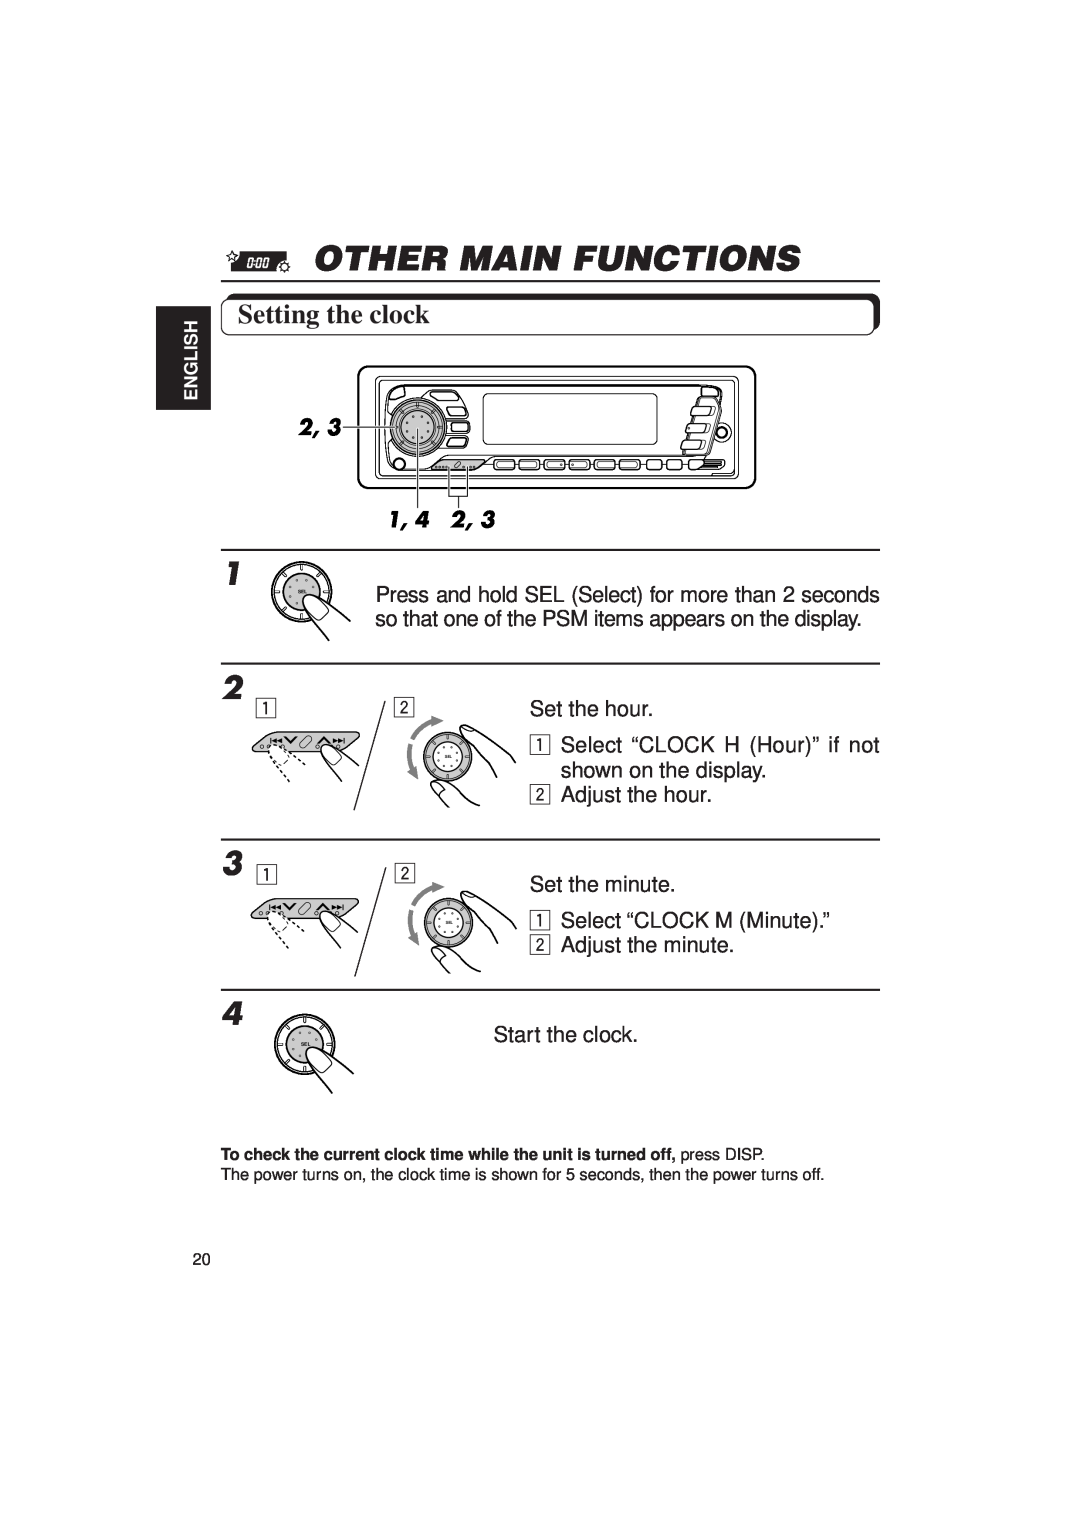 JVC KD-SX949, KD-SX940 manual Other Main Functions, Setting the clock, Press and hold SEL Select for more than 2 seconds 